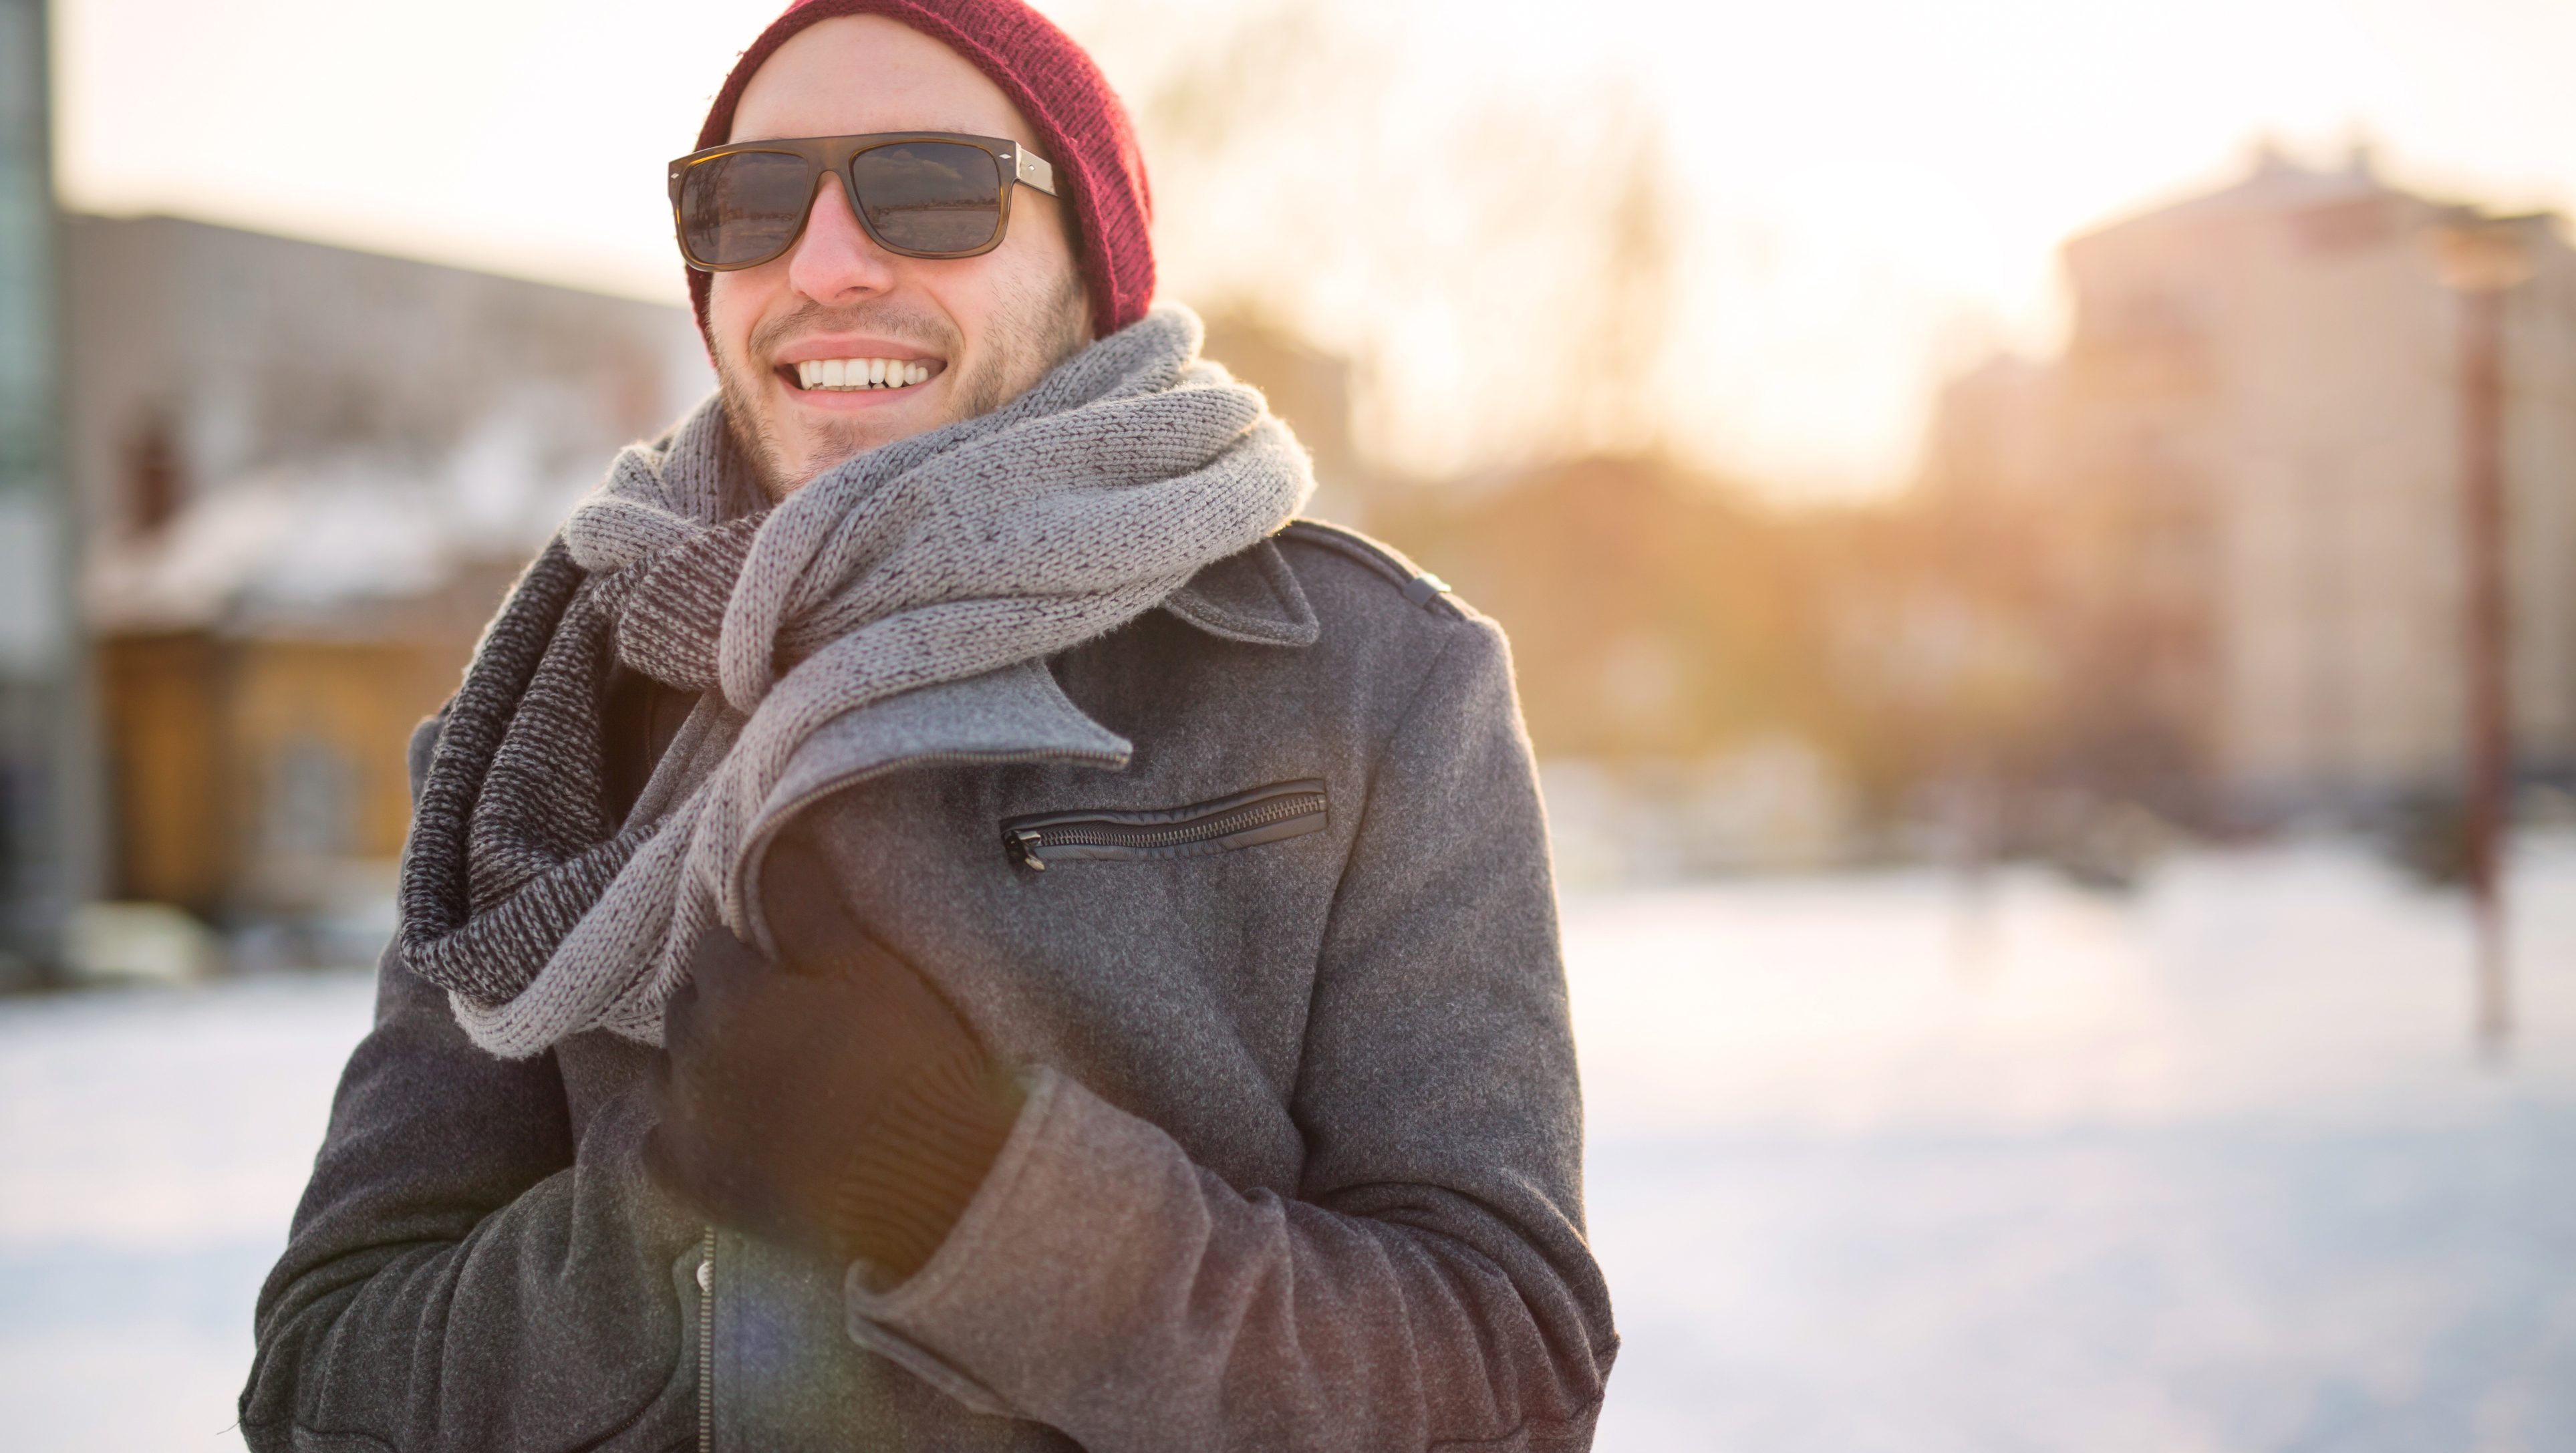 5 reasons to wear sunglasses in the winter